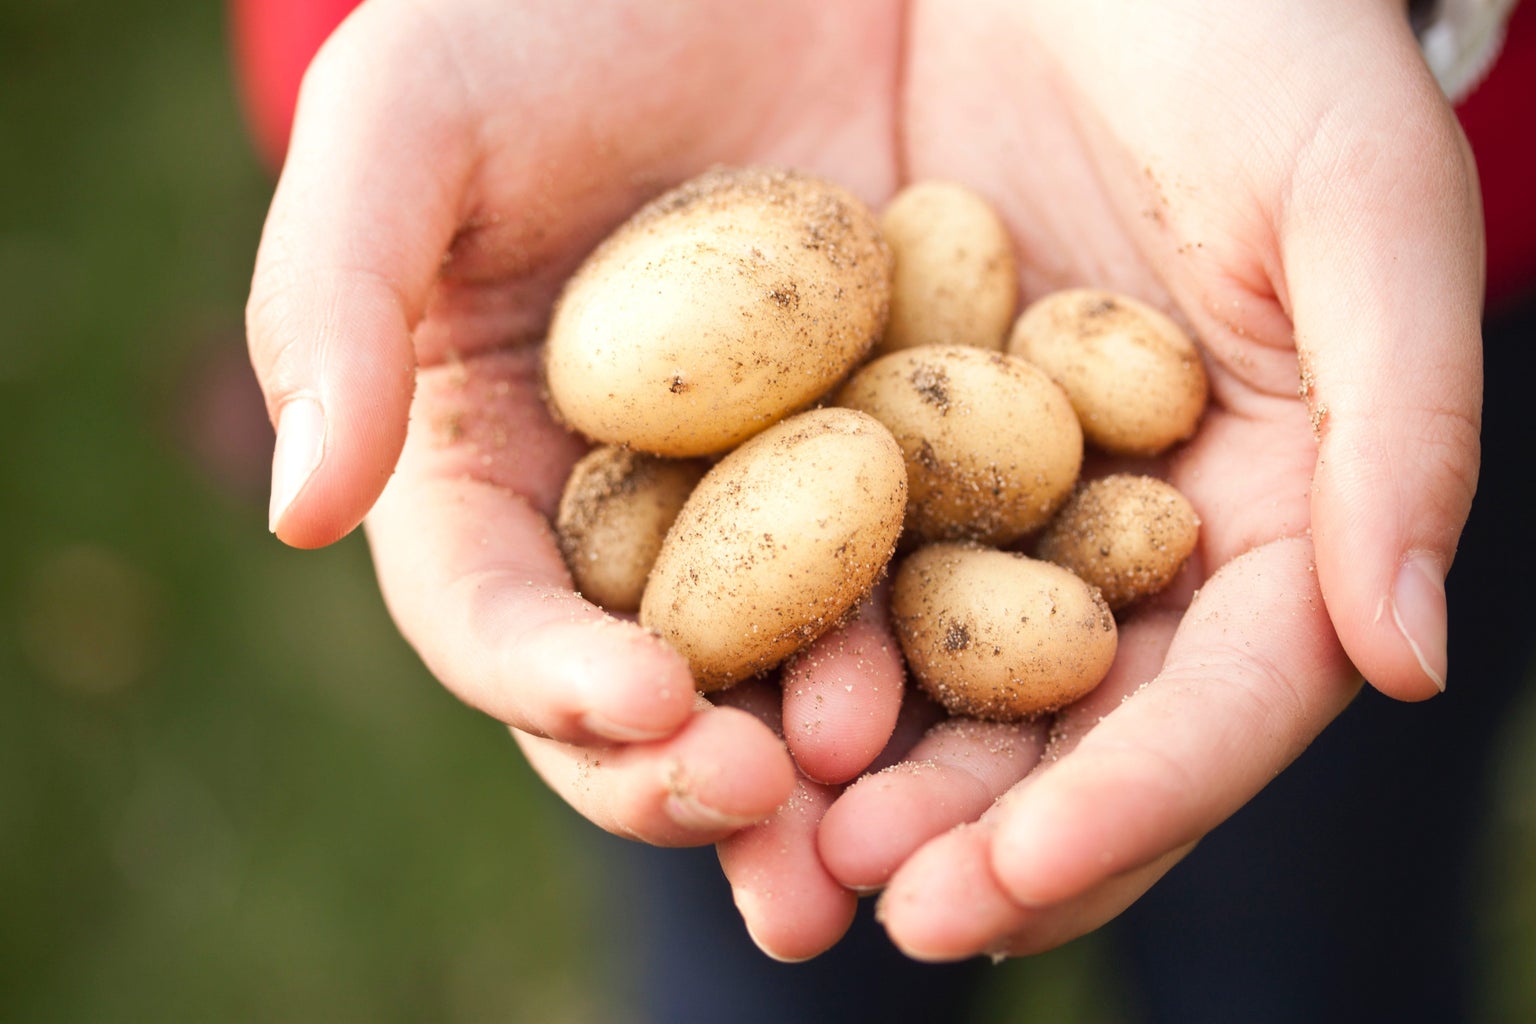 Hands holding small potatoes